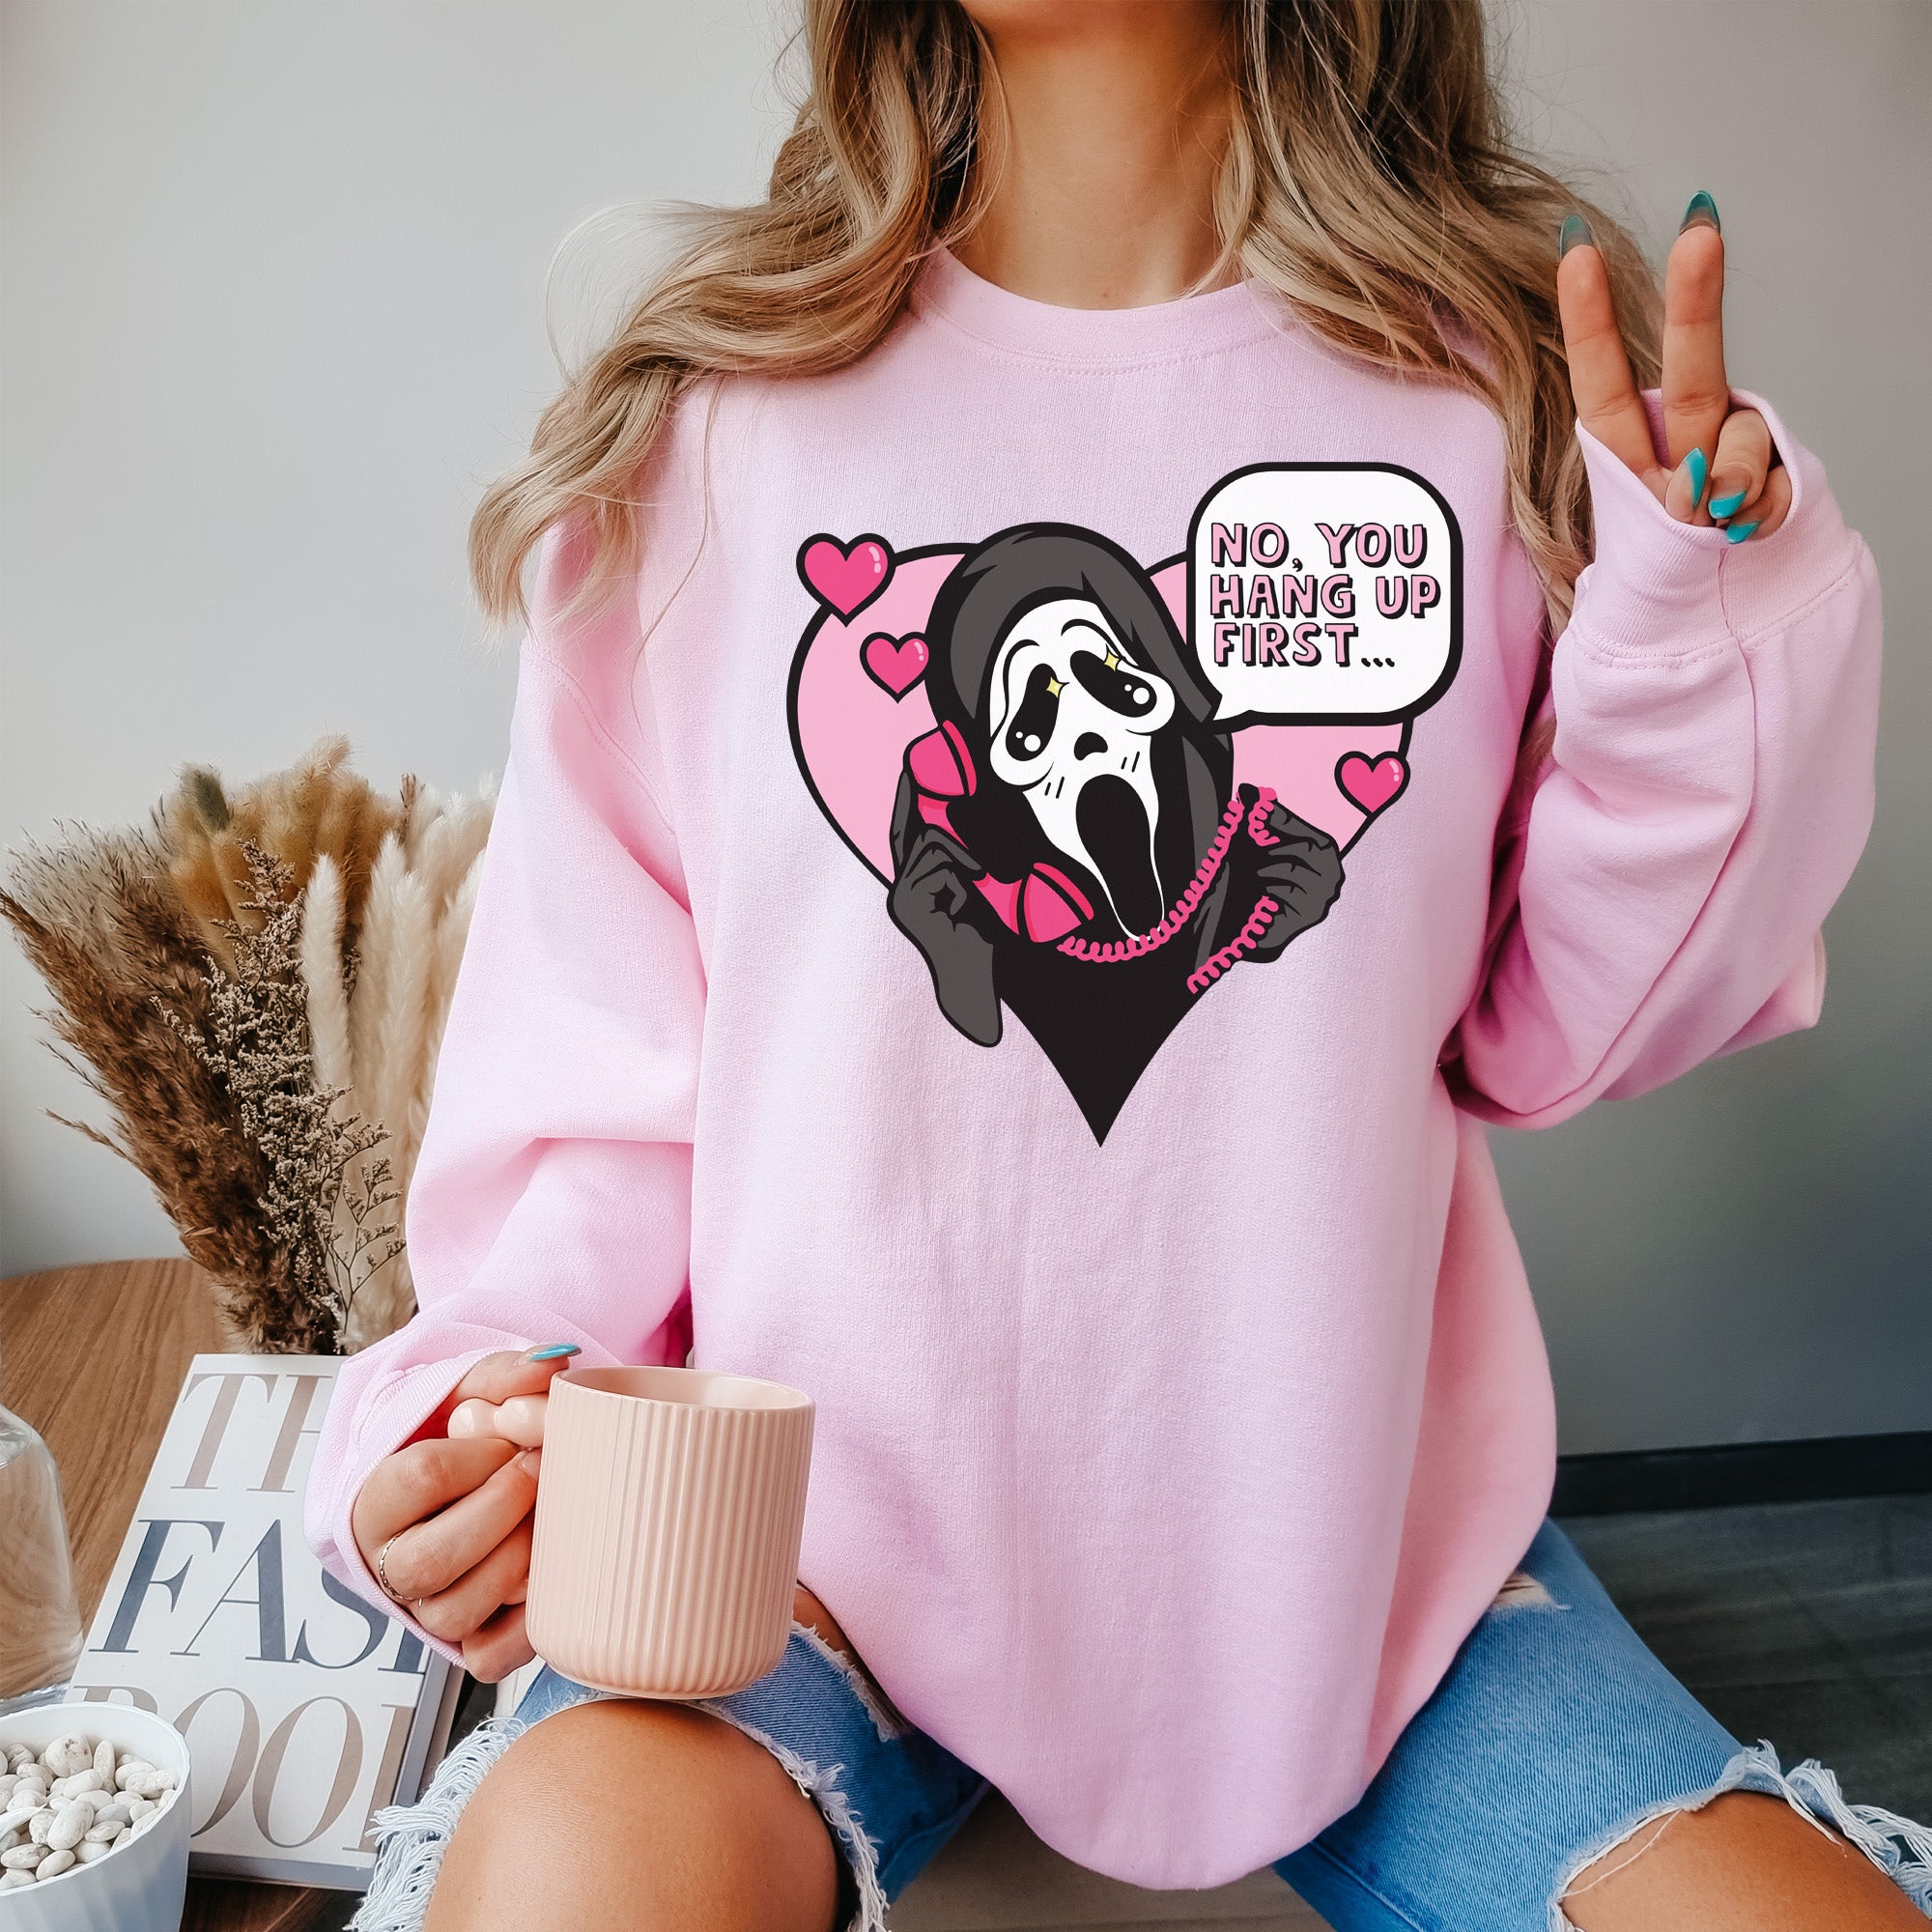 For all of the Ghost Face lovers, and Scream movie watchers. This halloween sweatshirt is perfect for you. all SKUs